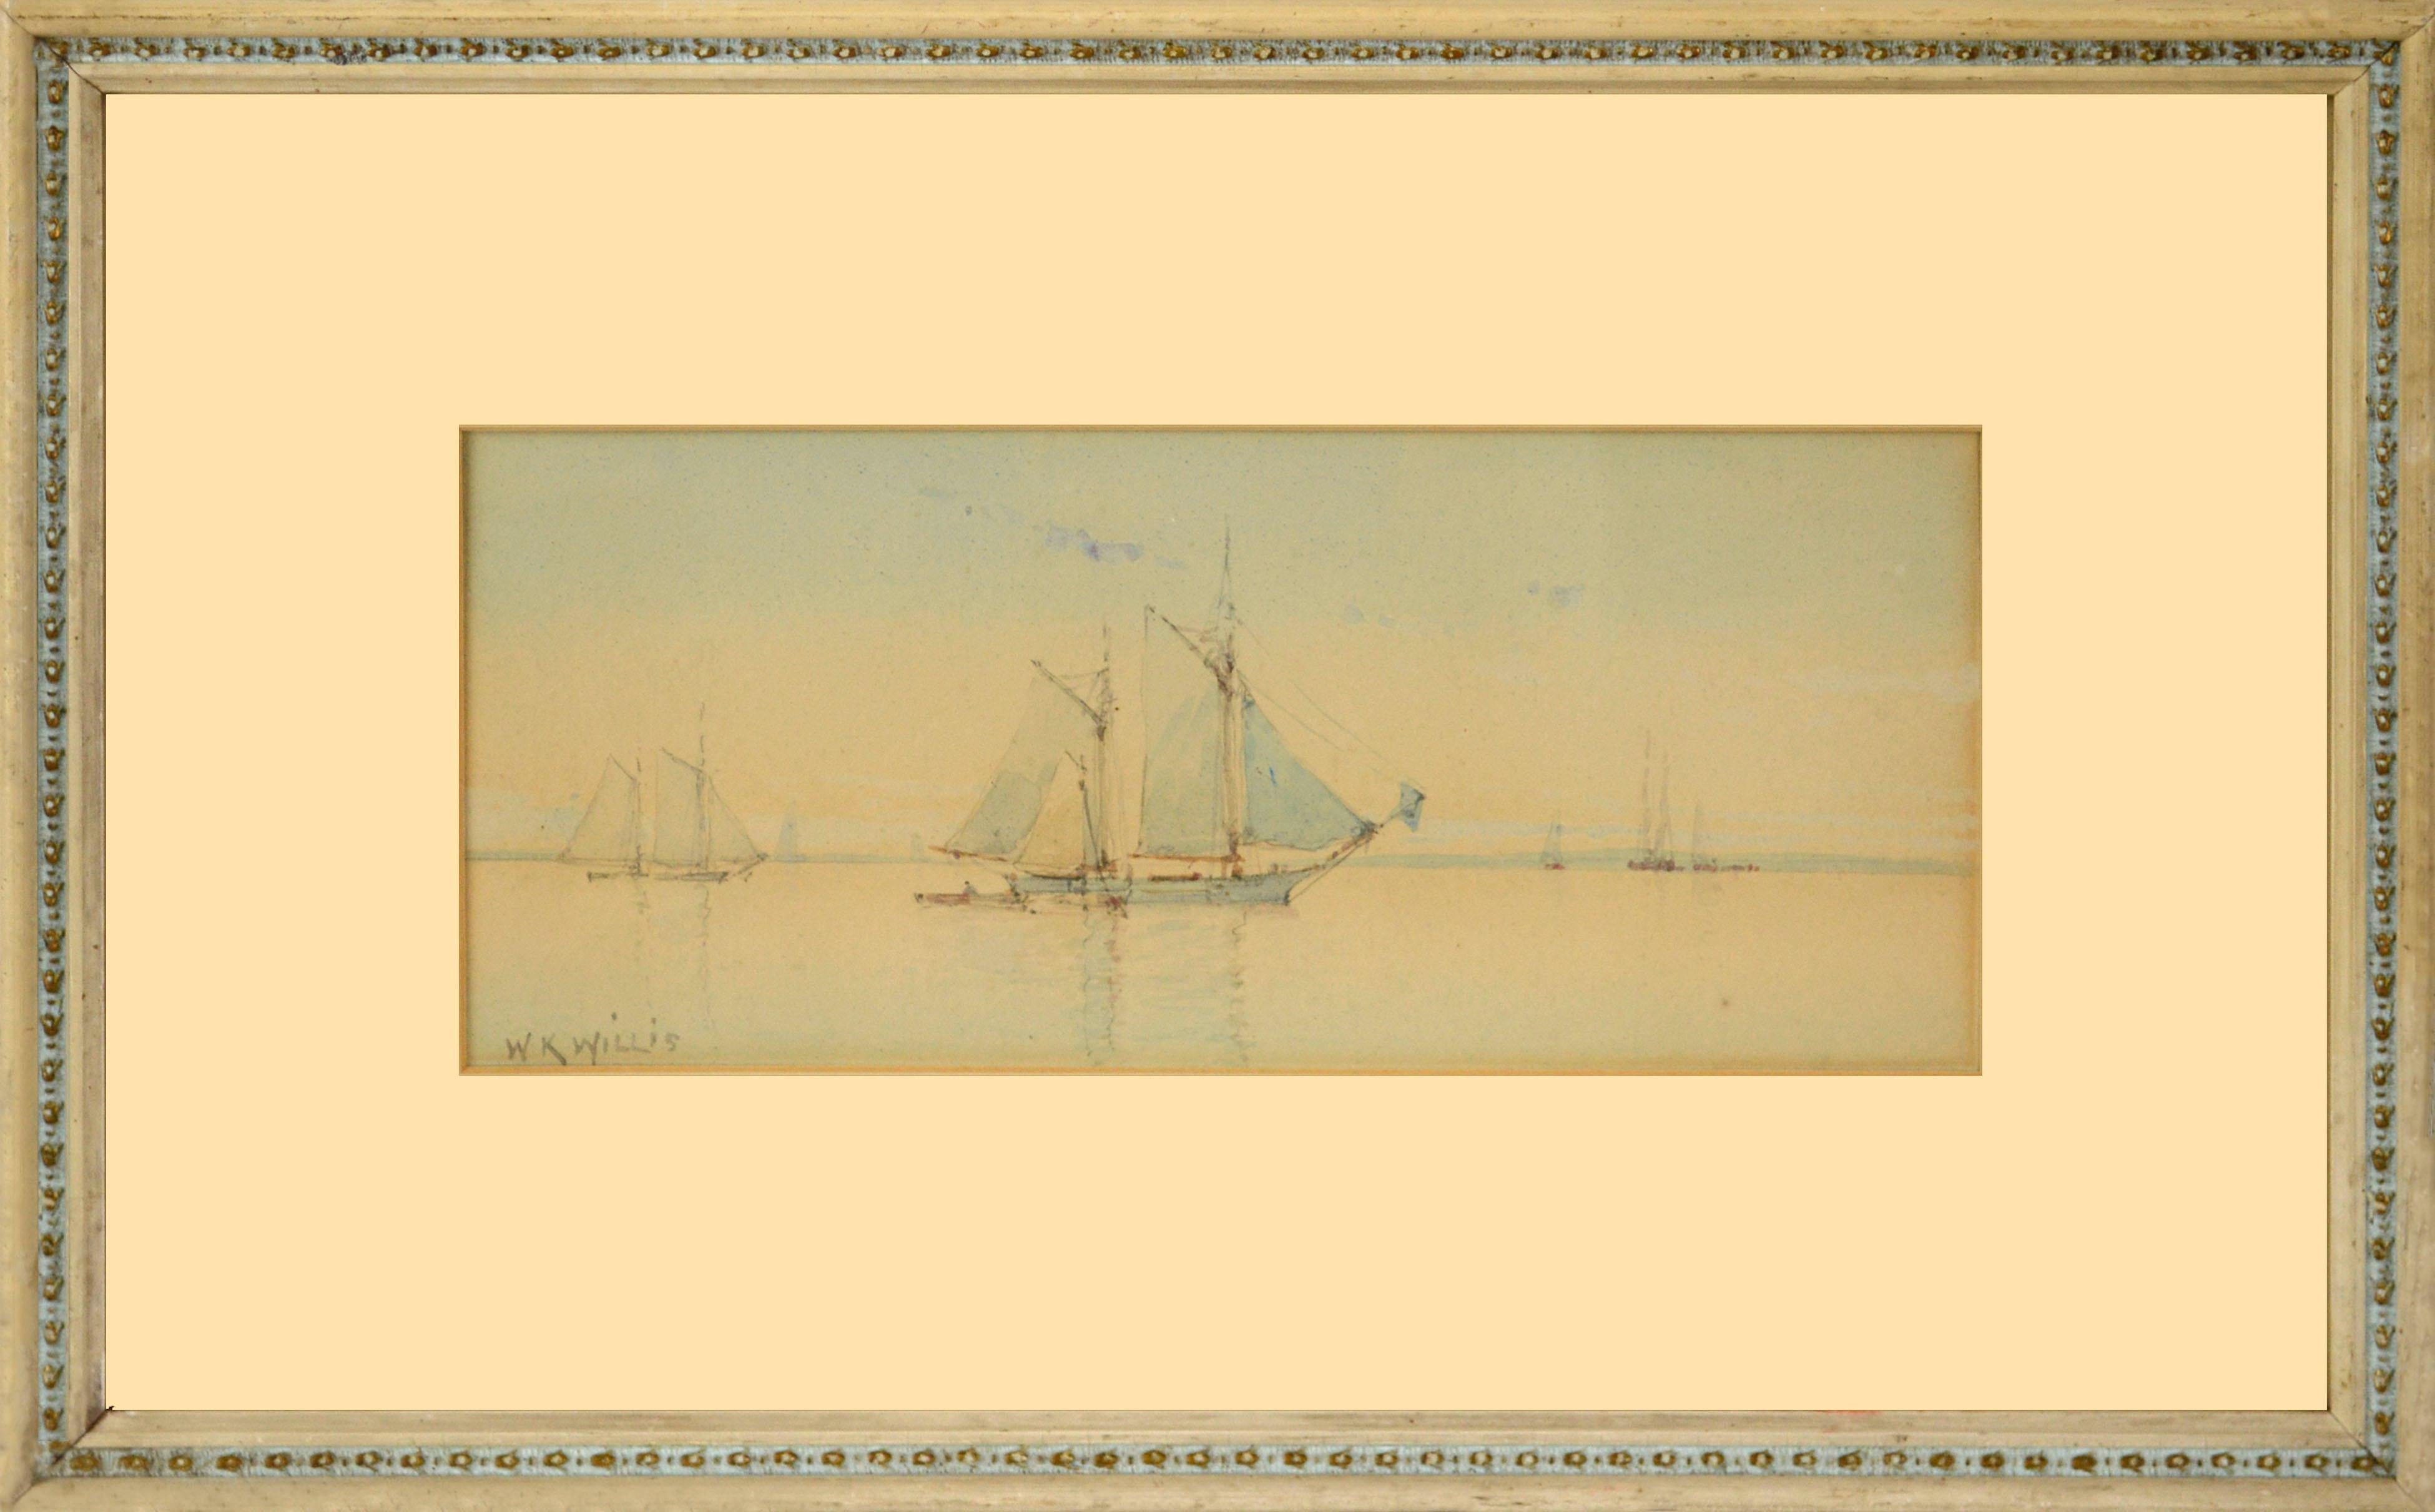 Schooners at Sail, Early 20thCentury Maritime Watercolor Seascape by W.K. Willis